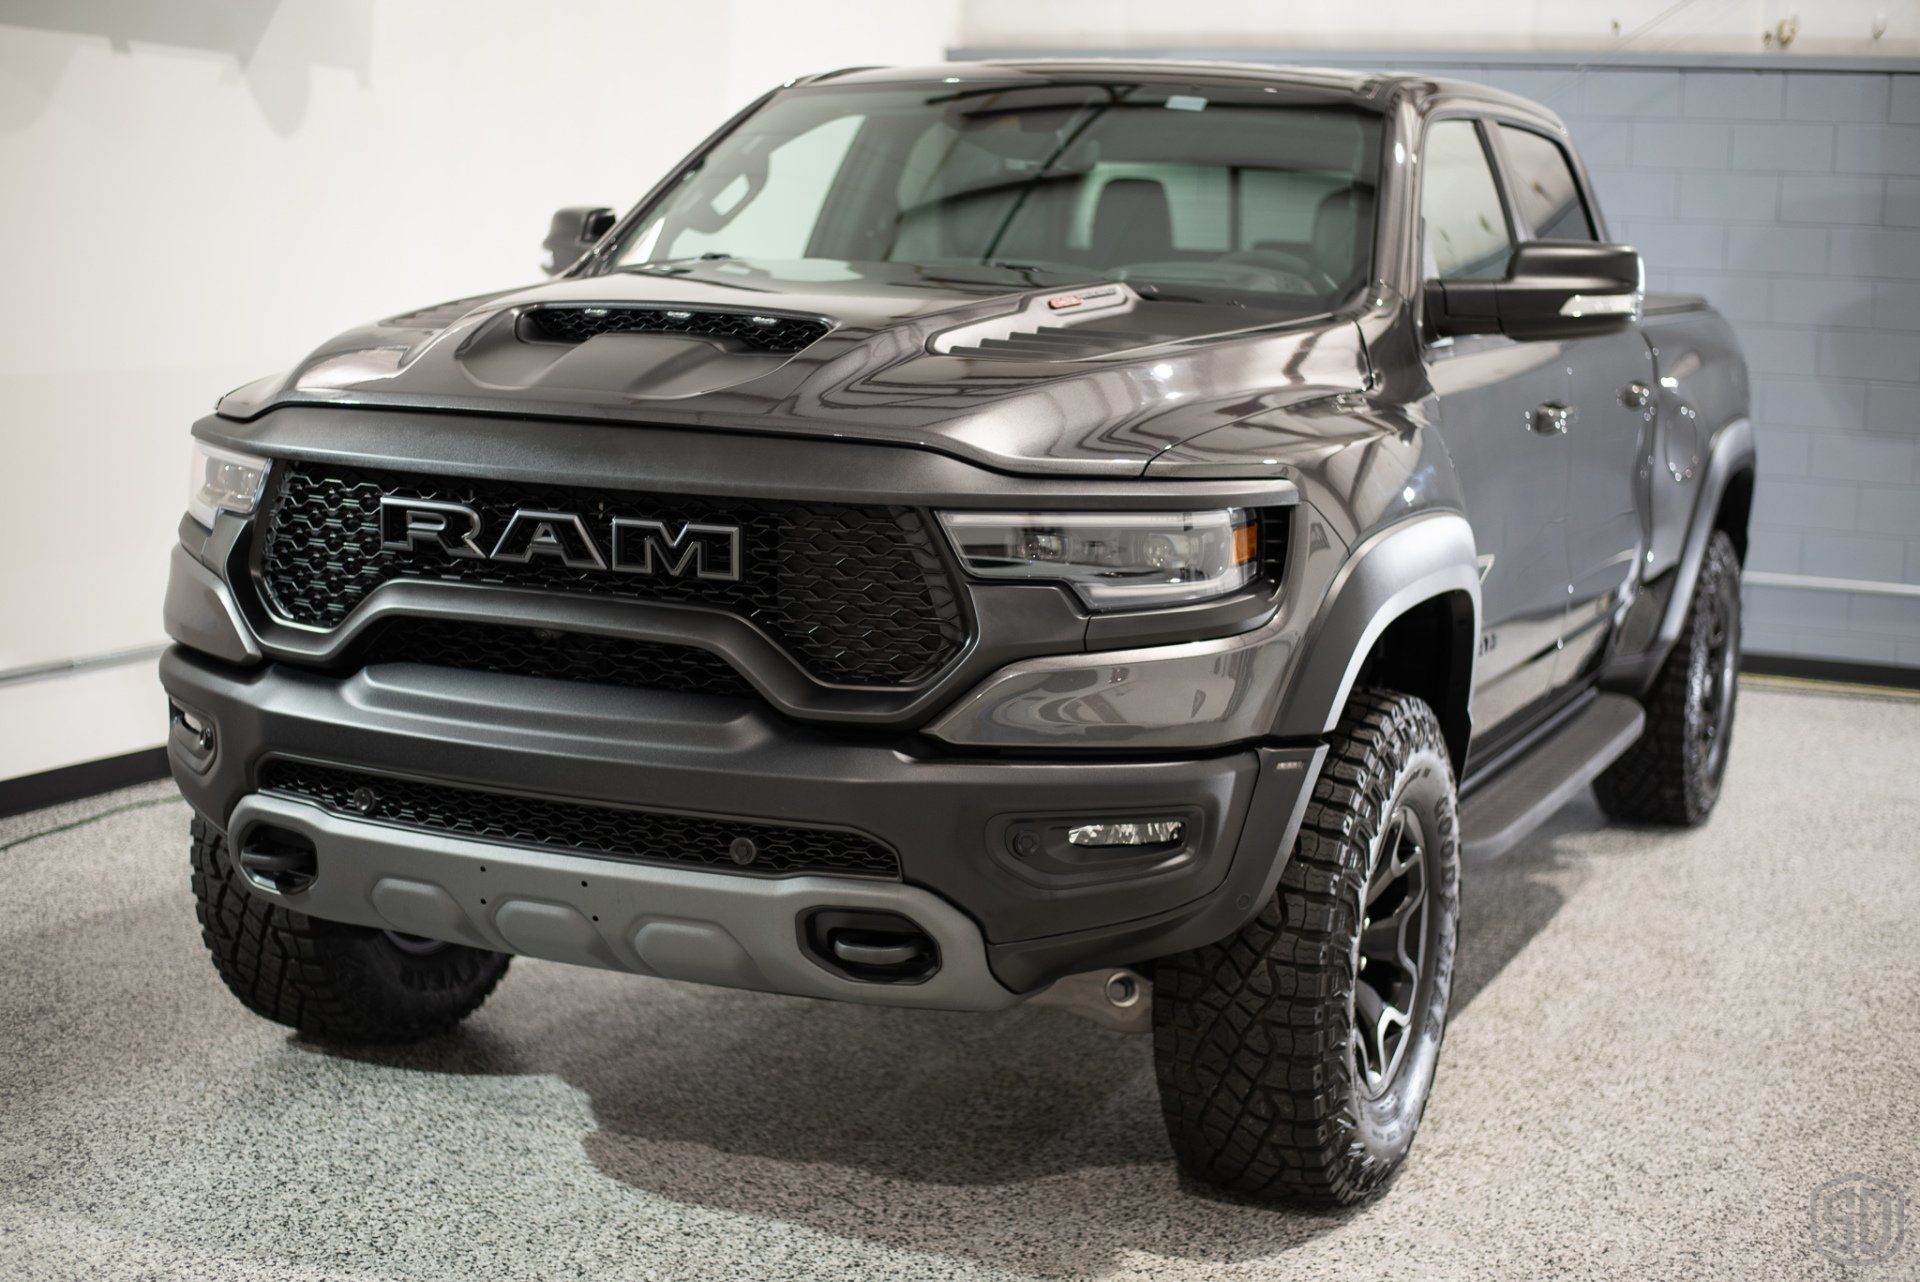 2021 Ram TRX Paint Protection Film and Coating